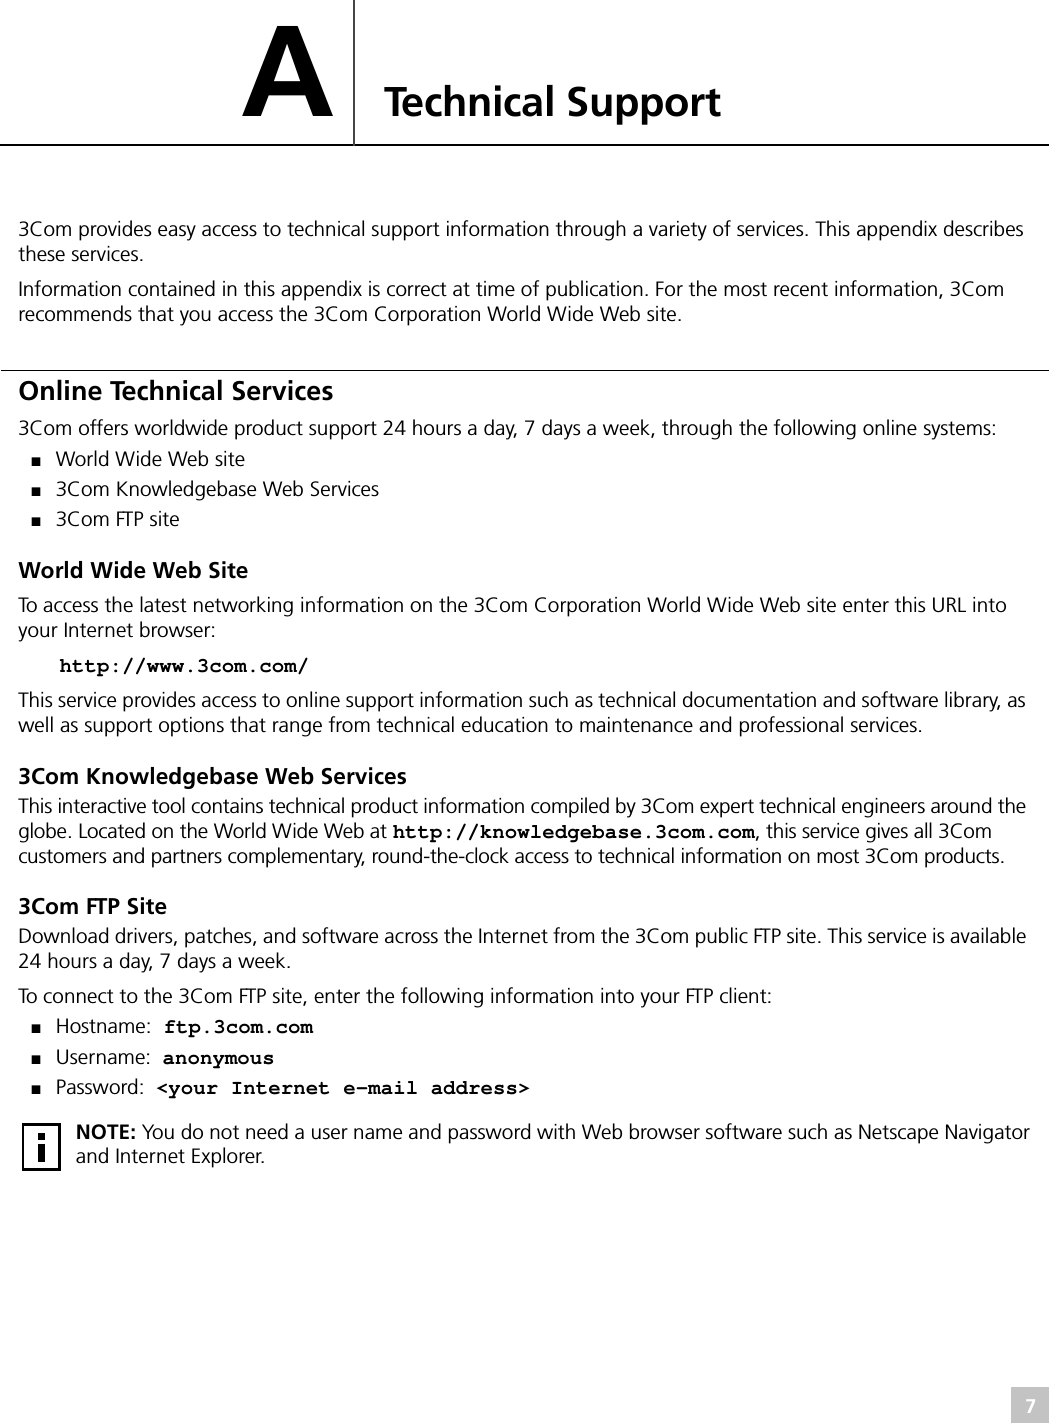 7ATechnical Support3Com provides easy access to technical support information through a variety of services. This appendix describes these services.Information contained in this appendix is correct at time of publication. For the most recent information, 3Com recommends that you access the 3Com Corporation World Wide Web site.Online Technical Services3Com offers worldwide product support 24 hours a day, 7 days a week, through the following online systems:■World Wide Web site■3Com Knowledgebase Web Services■3Com FTP siteWorld Wide Web SiteTo access the latest networking information on the 3Com Corporation World Wide Web site enter this URL into your Internet browser:http://www.3com.com/This service provides access to online support information such as technical documentation and software library, as well as support options that range from technical education to maintenance and professional services.3Com Knowledgebase Web ServicesThis interactive tool contains technical product information compiled by 3Com expert technical engineers around the globe. Located on the World Wide Web at http://knowledgebase.3com.com, this service gives all 3Com customers and partners complementary, round-the-clock access to technical information on most 3Com products.3Com FTP SiteDownload drivers, patches, and software across the Internet from the 3Com public FTP site. This service is available 24 hours a day, 7 days a week.To connect to the 3Com FTP site, enter the following information into your FTP client:■Hostname: ftp.3com.com■Username: anonymous■Password: &lt;your Internet e-mail address&gt;NOTE: You do not need a user name and password with Web browser software such as Netscape Navigator and Internet Explorer.